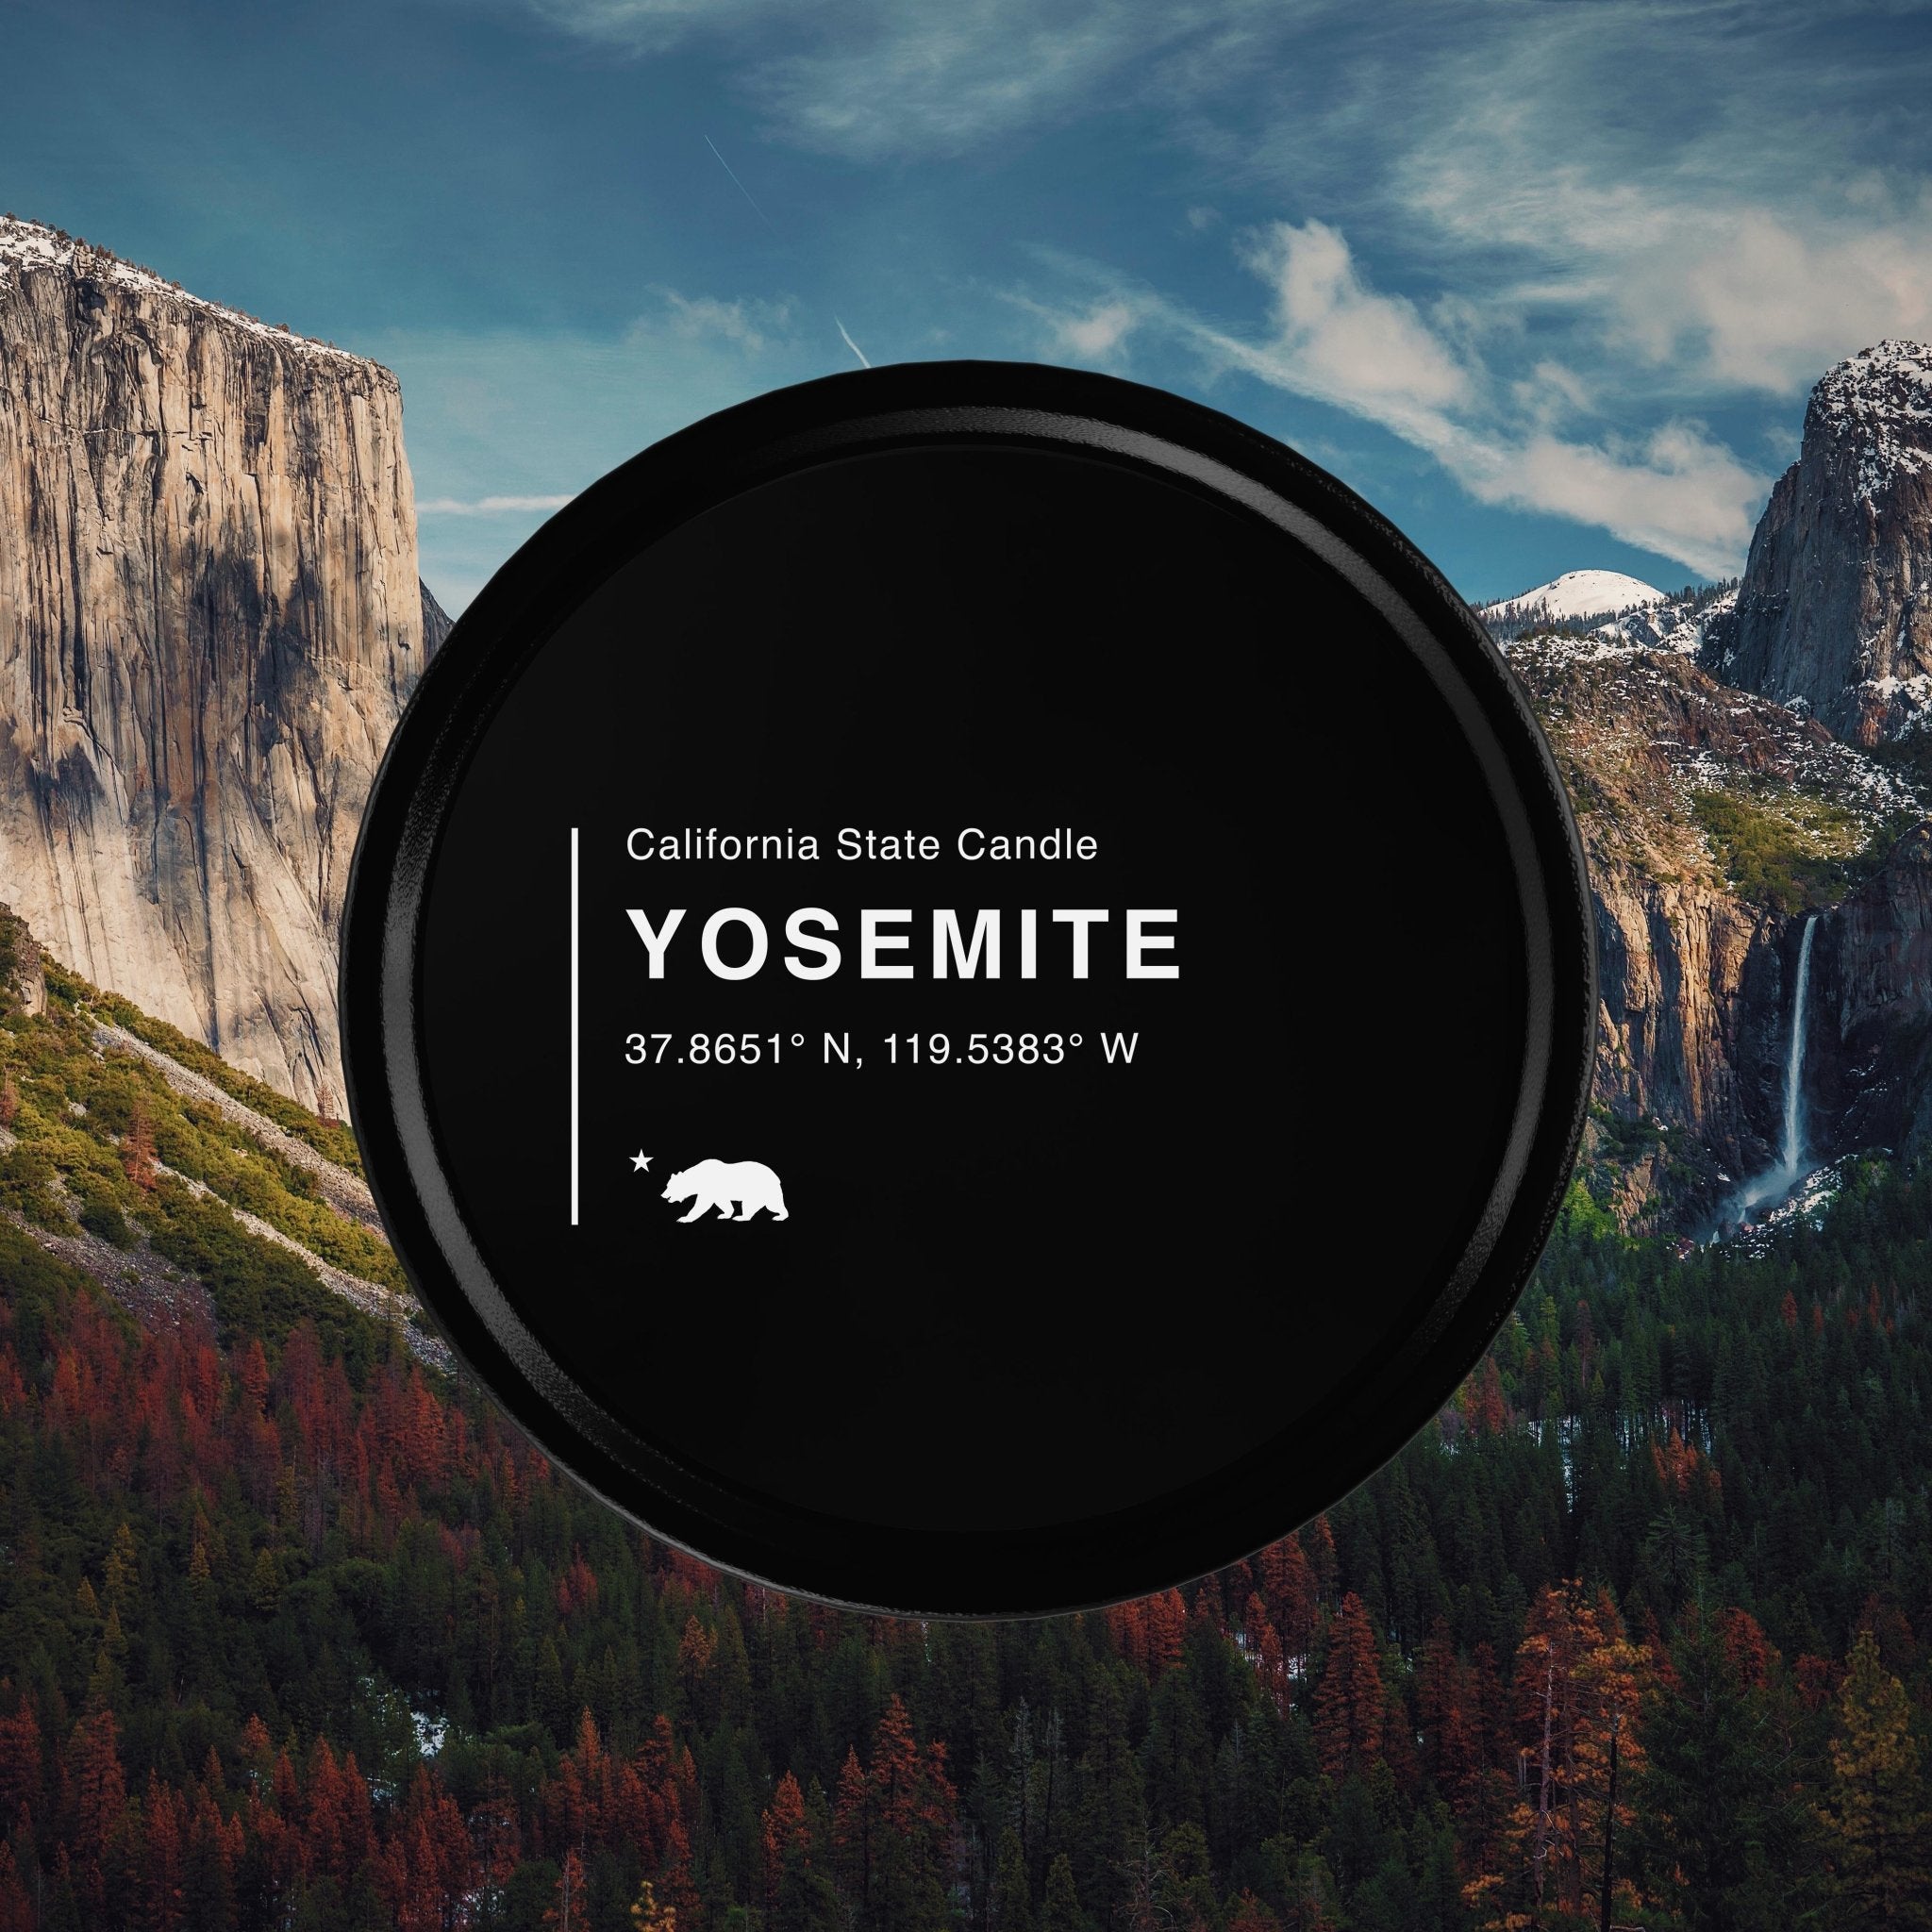 Yosemite California Scented Travel Tin Candle - Candlefy